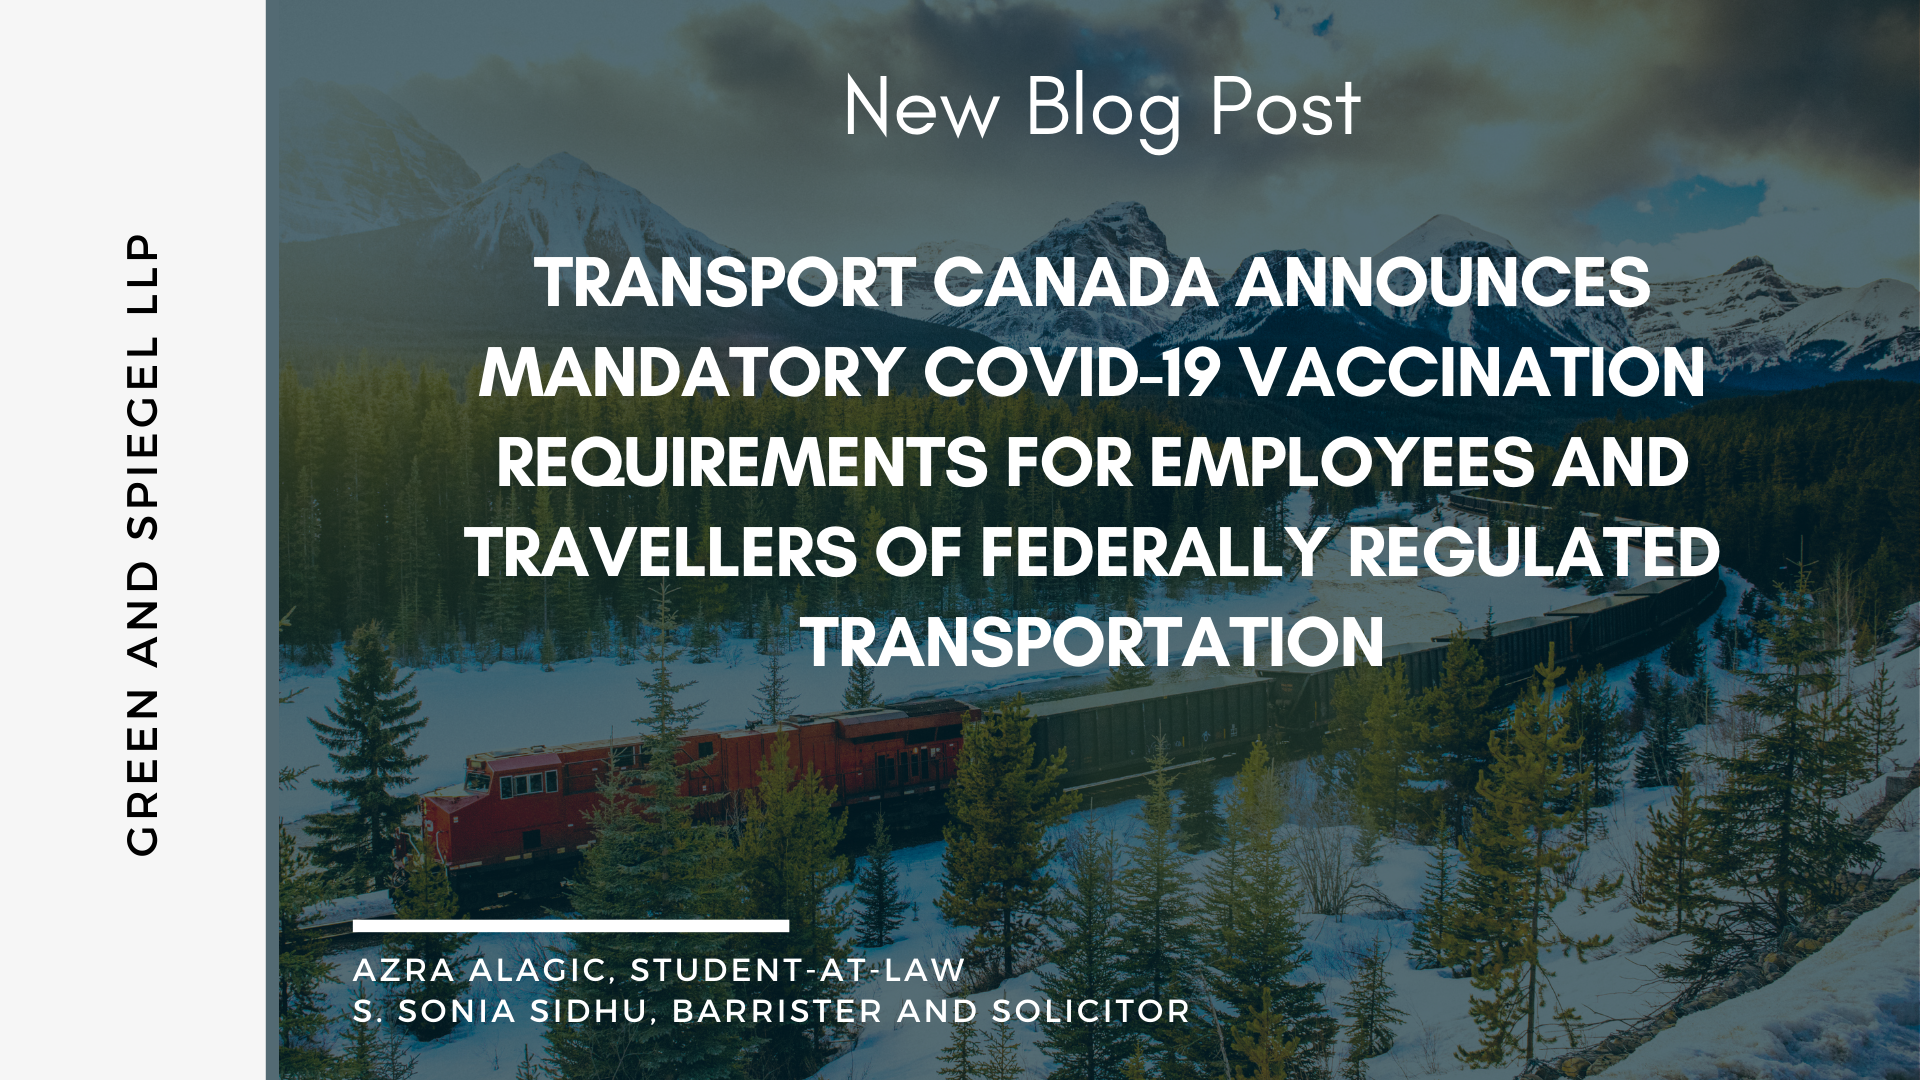 TRANSPORT CANADA ANNOUNCES MANDATORY COVID-19 VACCINATION REQUIREMENTS FOR EMPLOYEES AND TRAVELLERS OF FEDERALLY REGULATED TRANSPORTATION